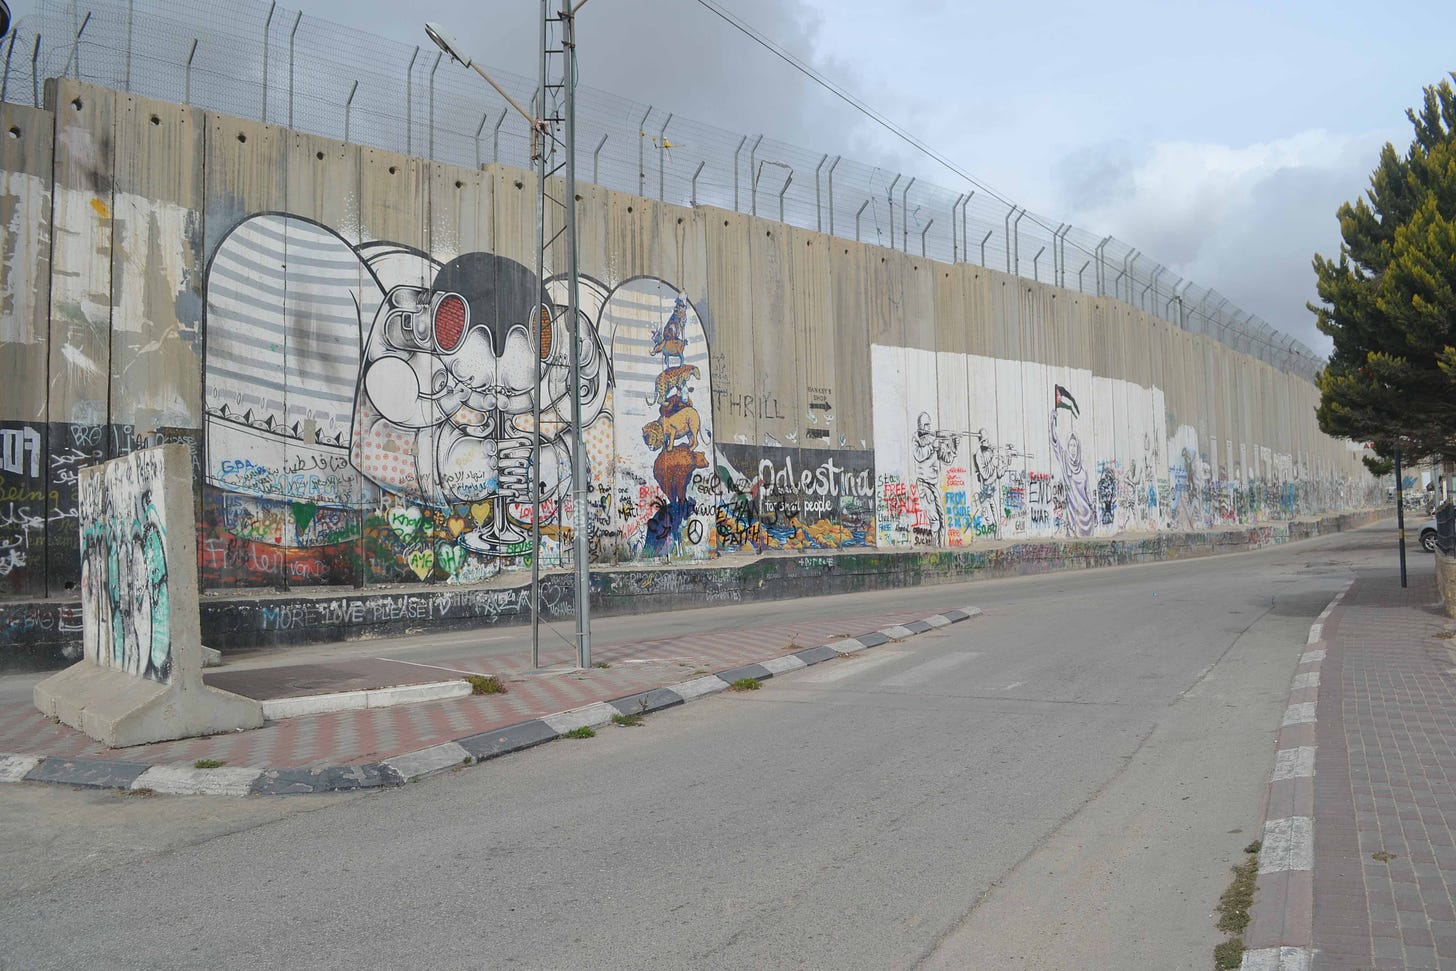 The Wall in Bethlehem That Segregates and Subjugates Palestinians